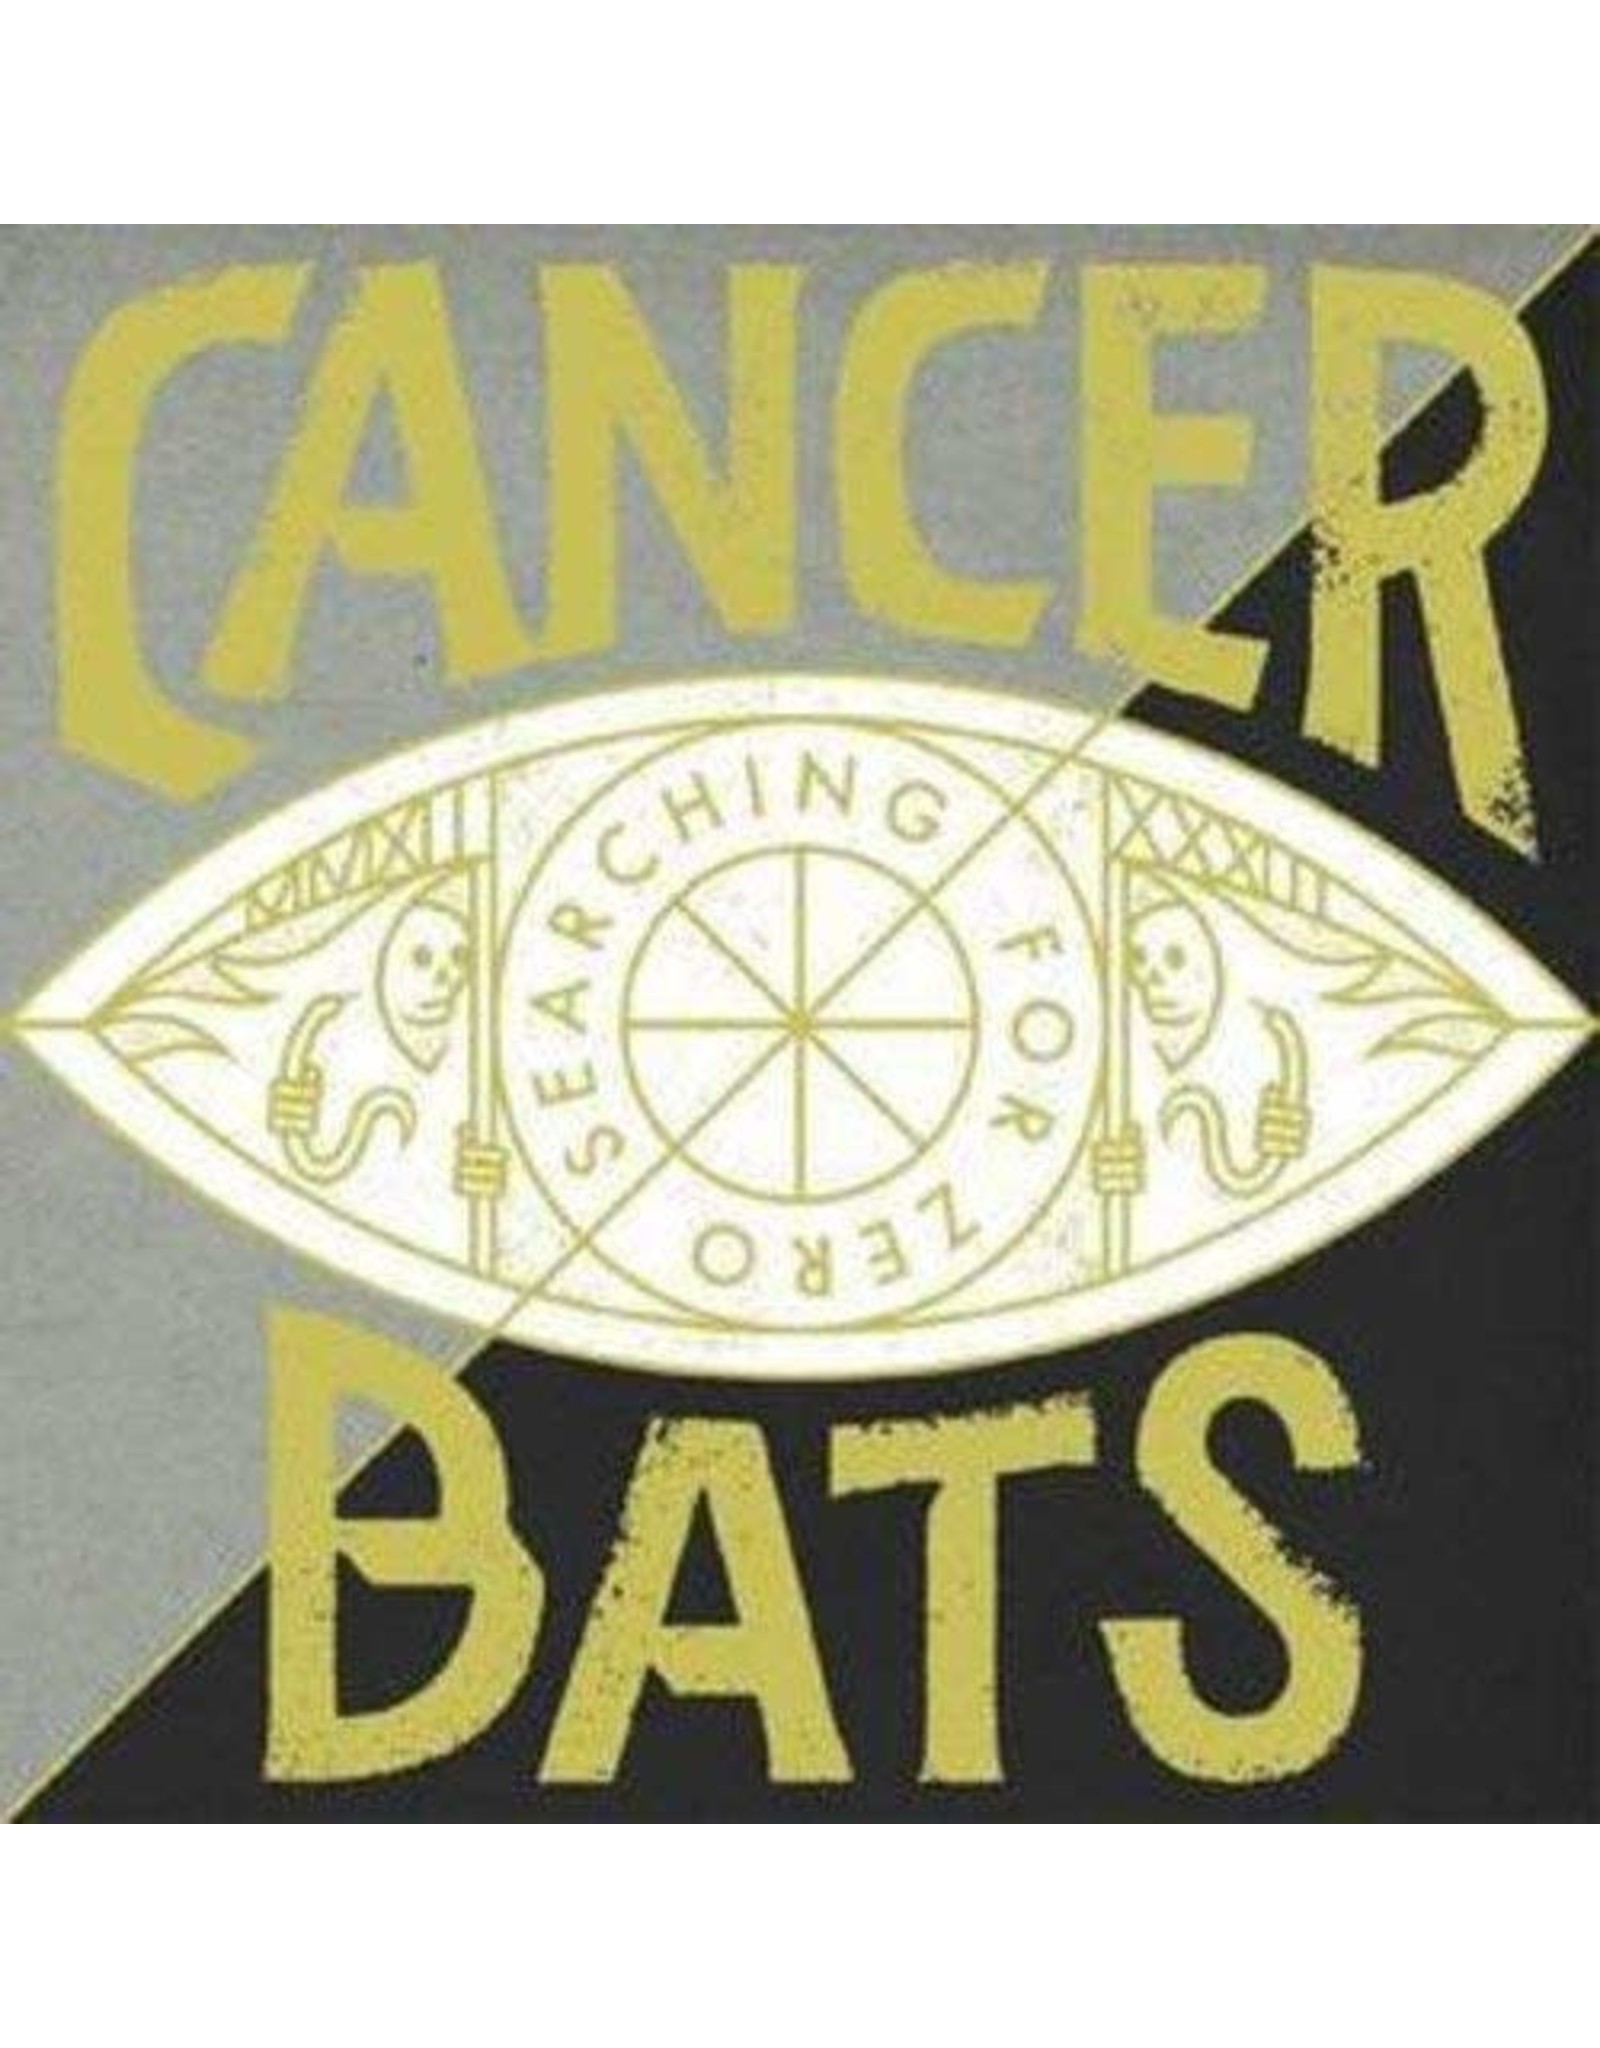 Cancer Bats - Searching For Zero LP